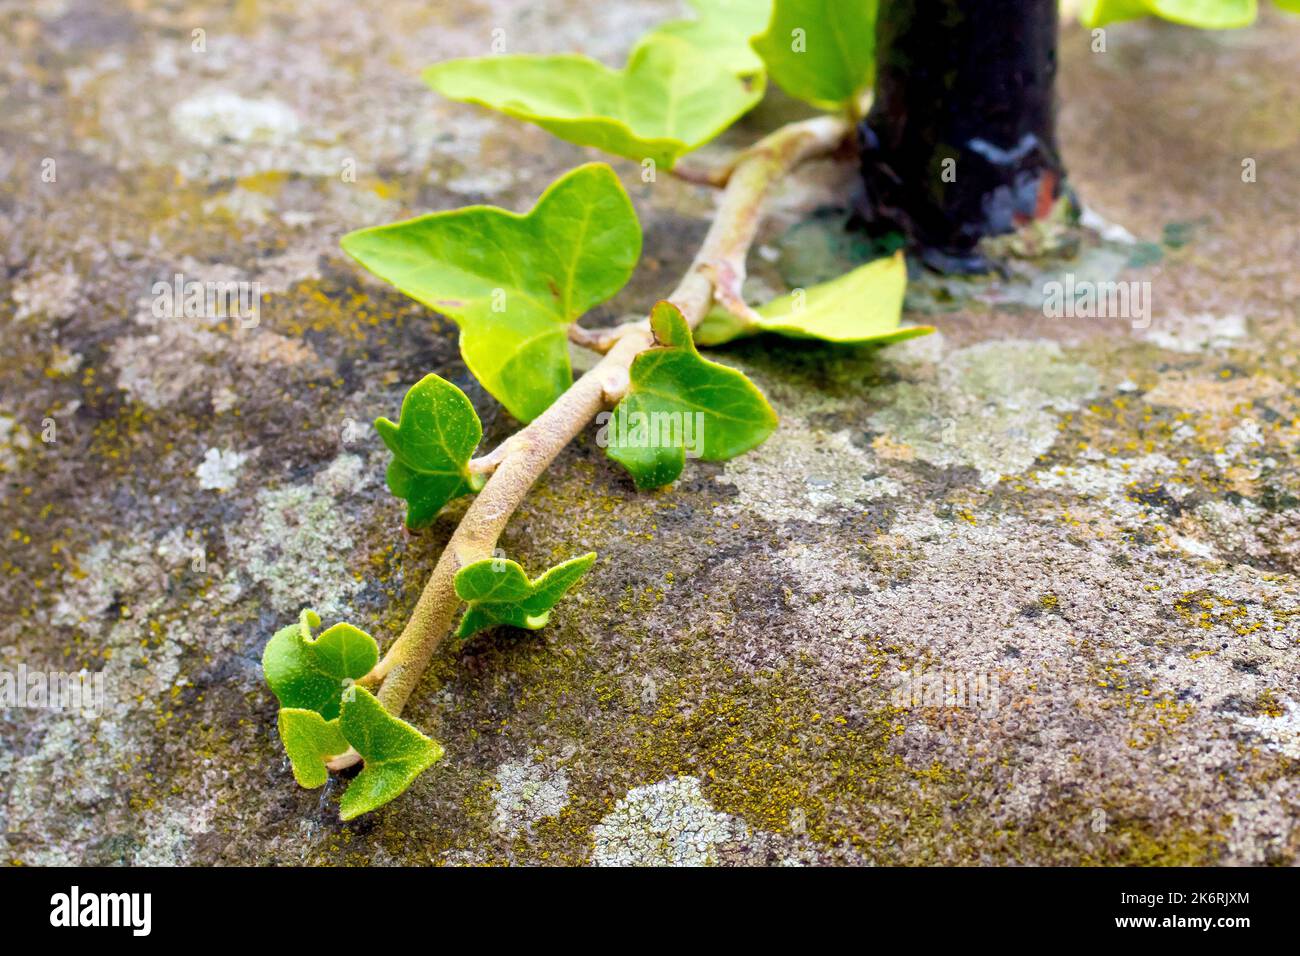 Ivy (hedera helix), close up showing the end of a tendril of the climbing plant reaching out over a lichen covered sandstone wall. Stock Photo